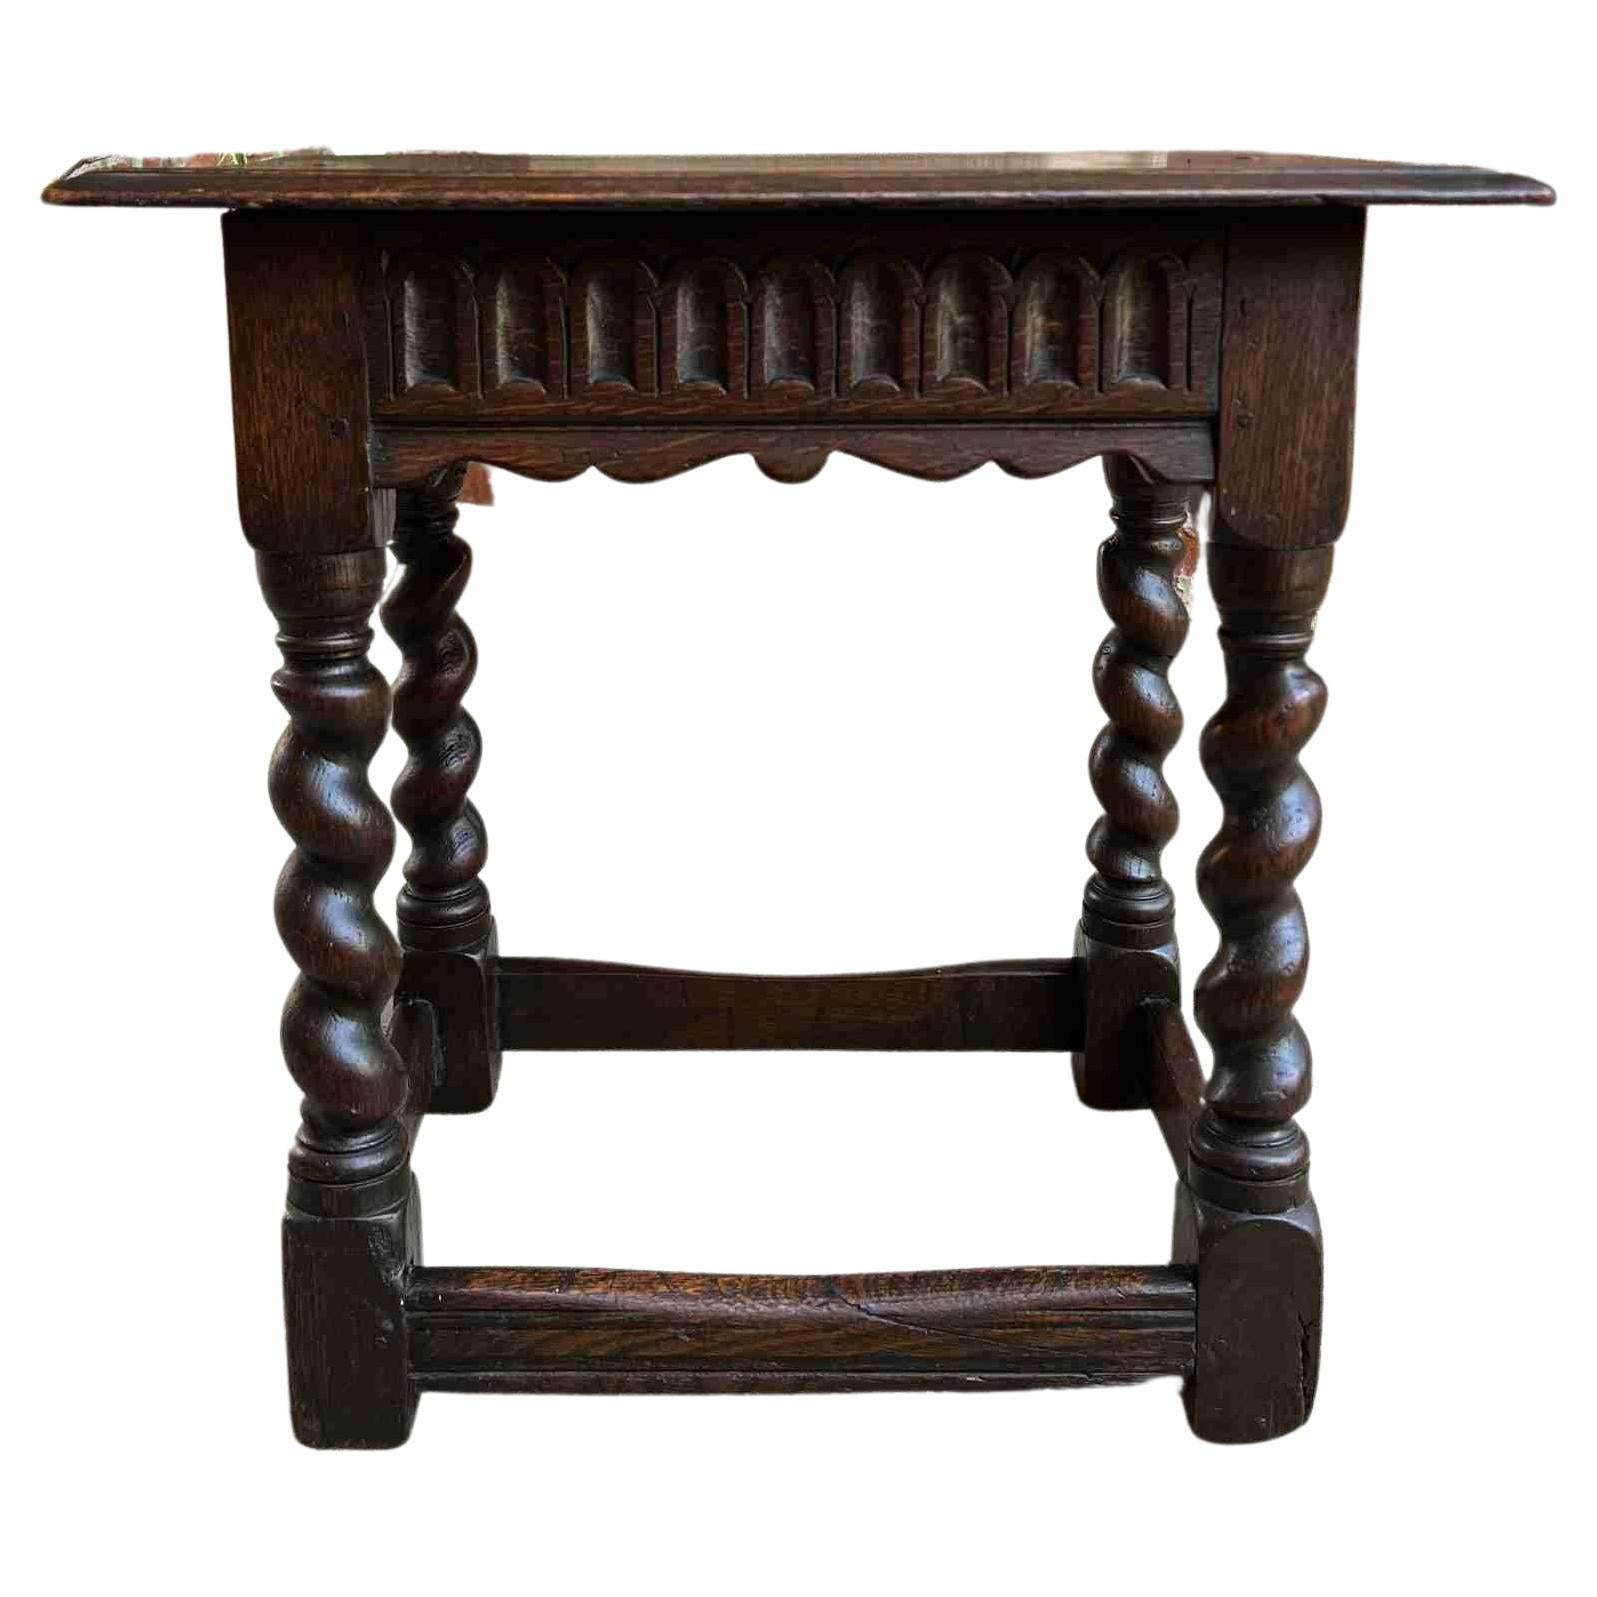 19th Century English Carved Oak Jacobean Joint Stool Bench Barley Twist Pegged